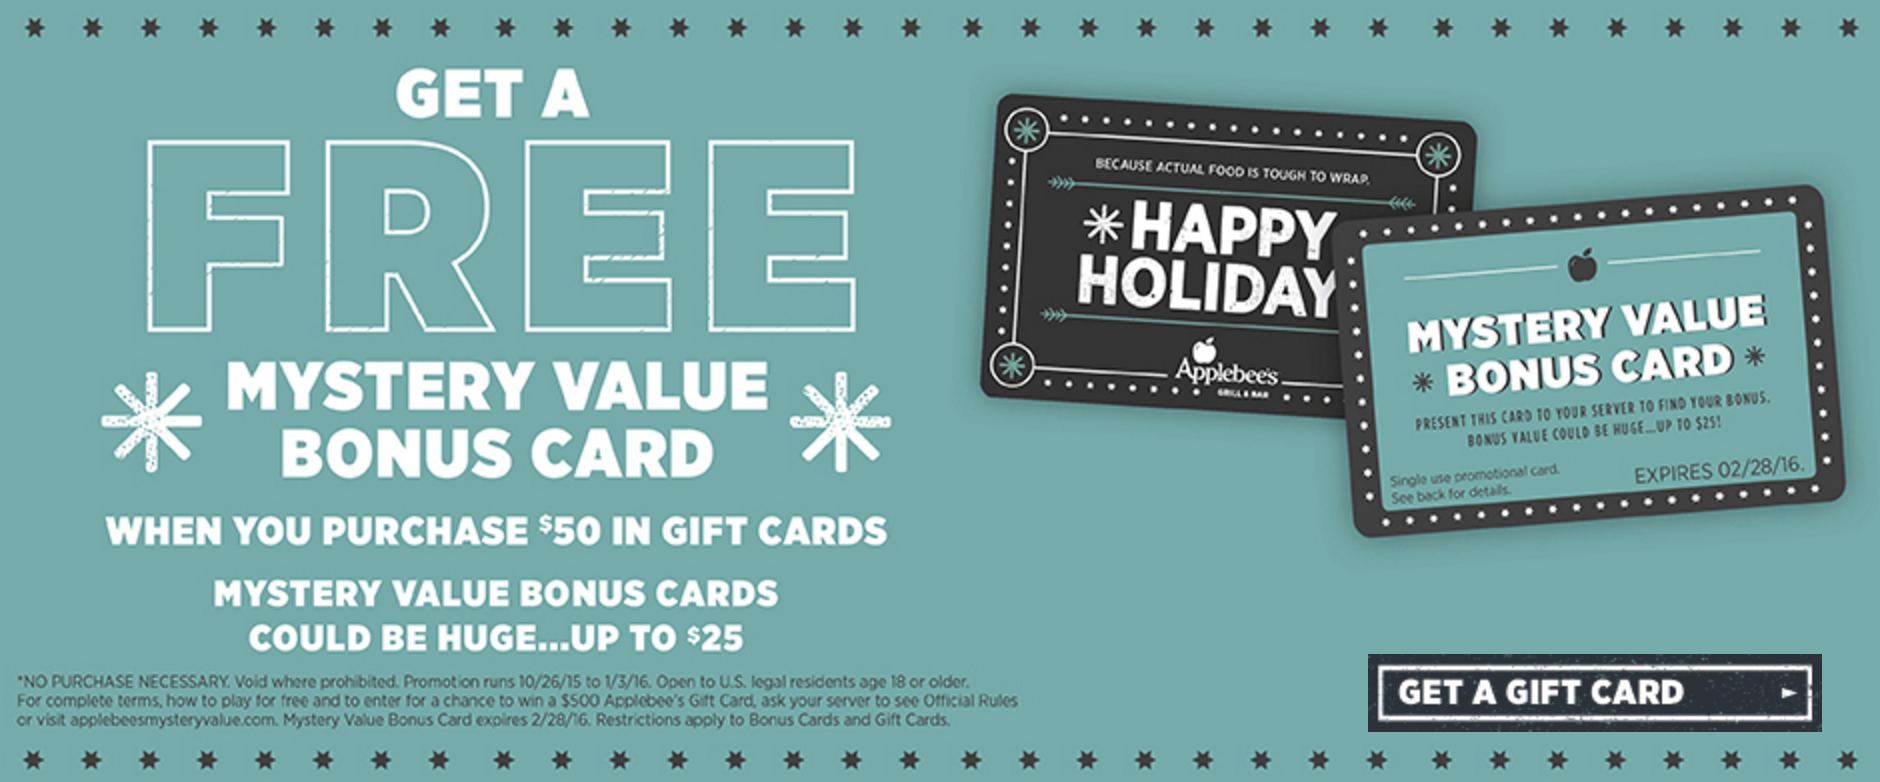 Applebee S Mystery Values Gift Card Promotion